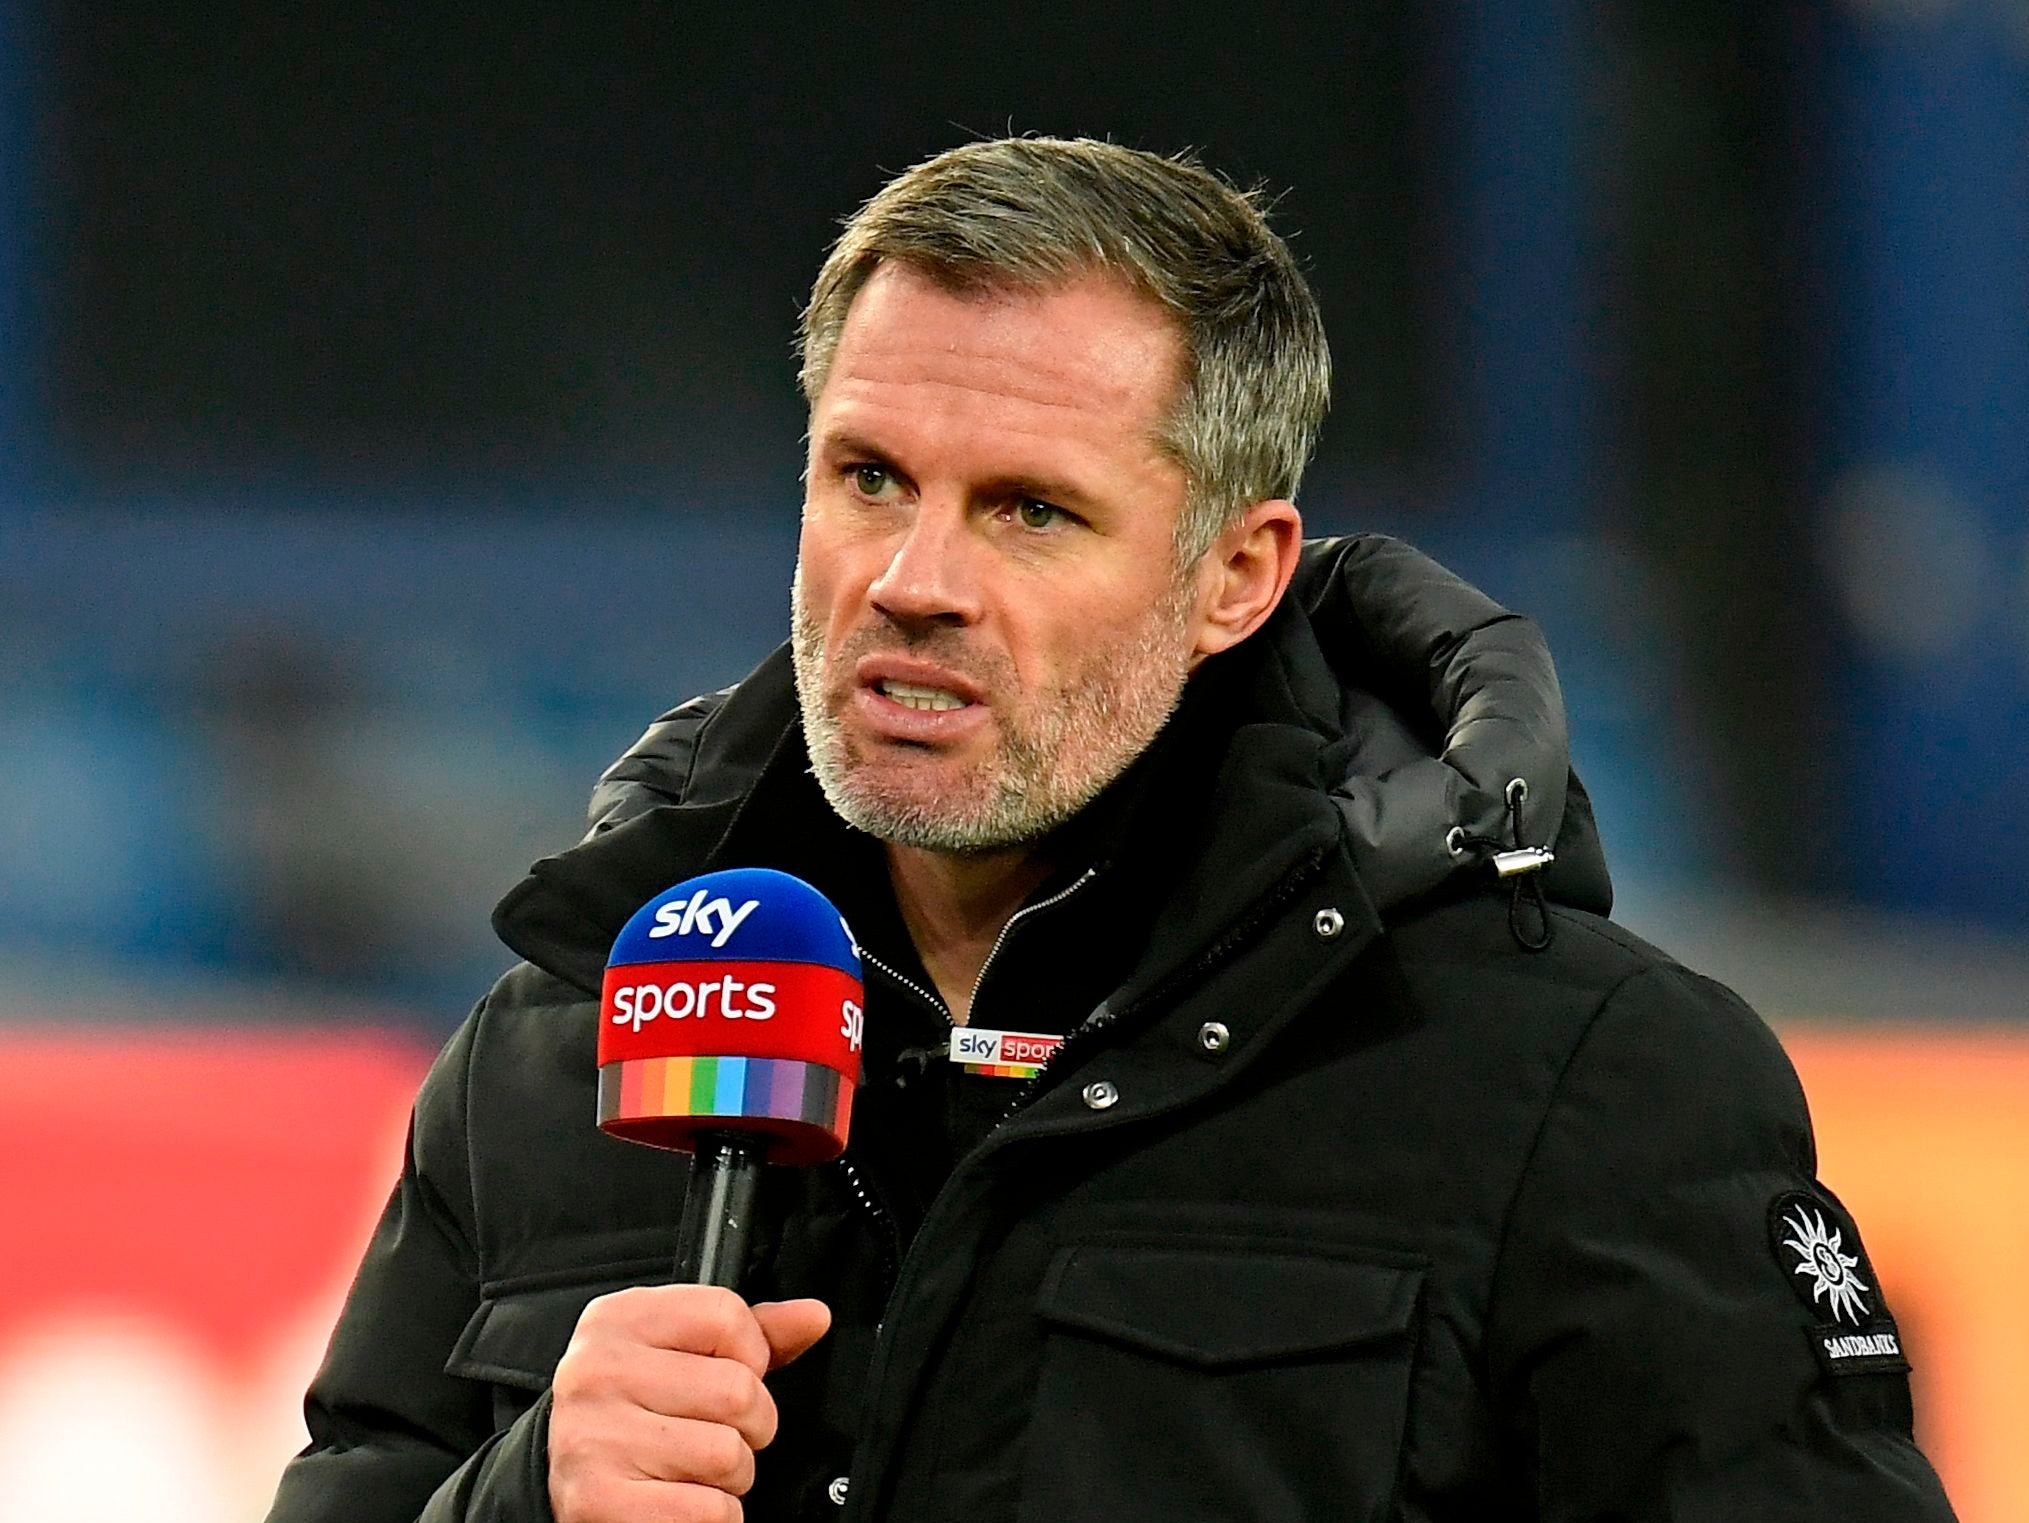 Jamie Carragher believes Carlo Ancelotti can make the difference for Everton